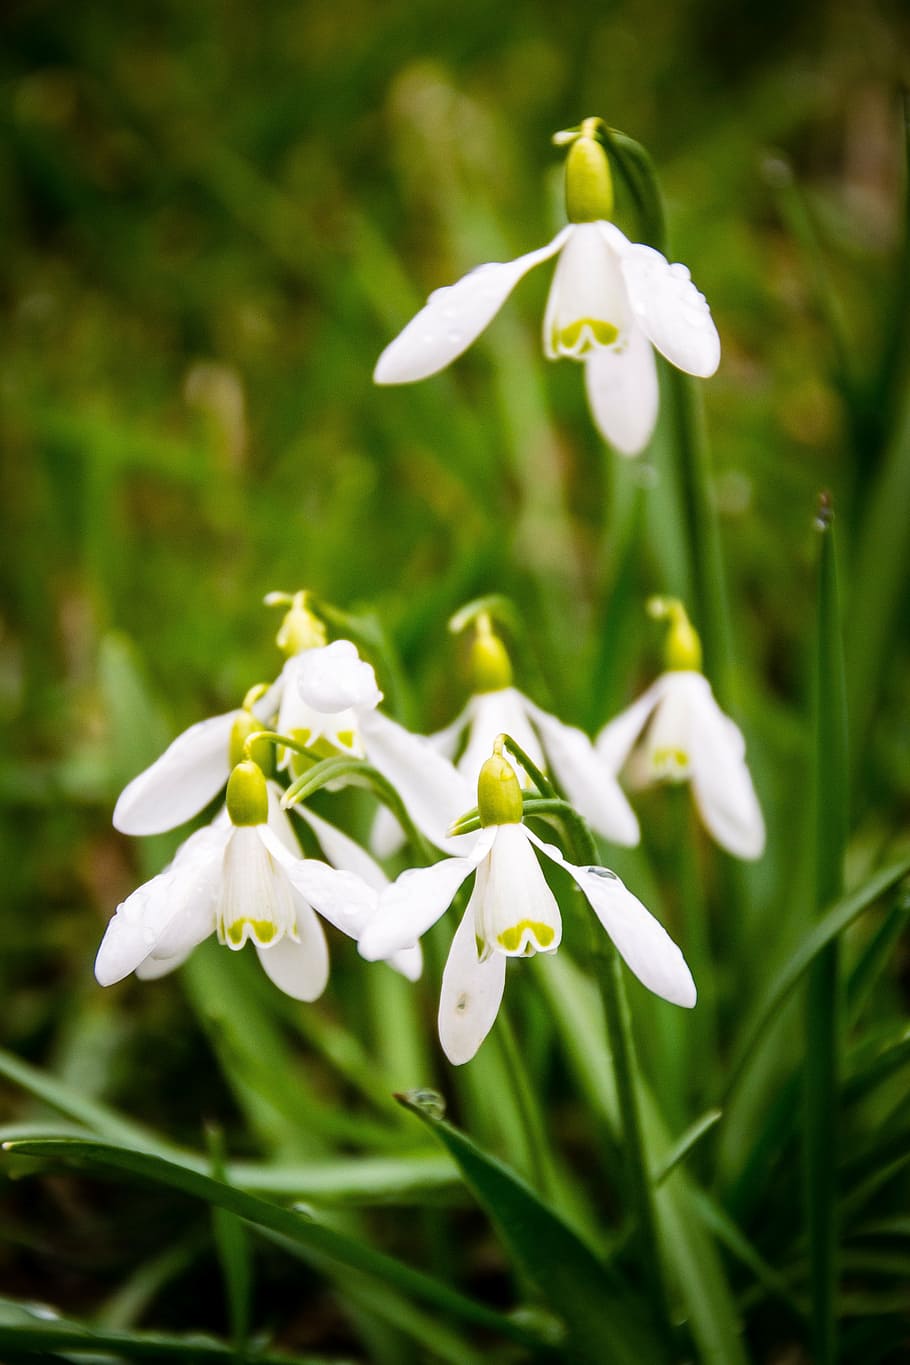 snowdrop, plant, spring, green, macro, white, flowers, snowdrops, plants, nature